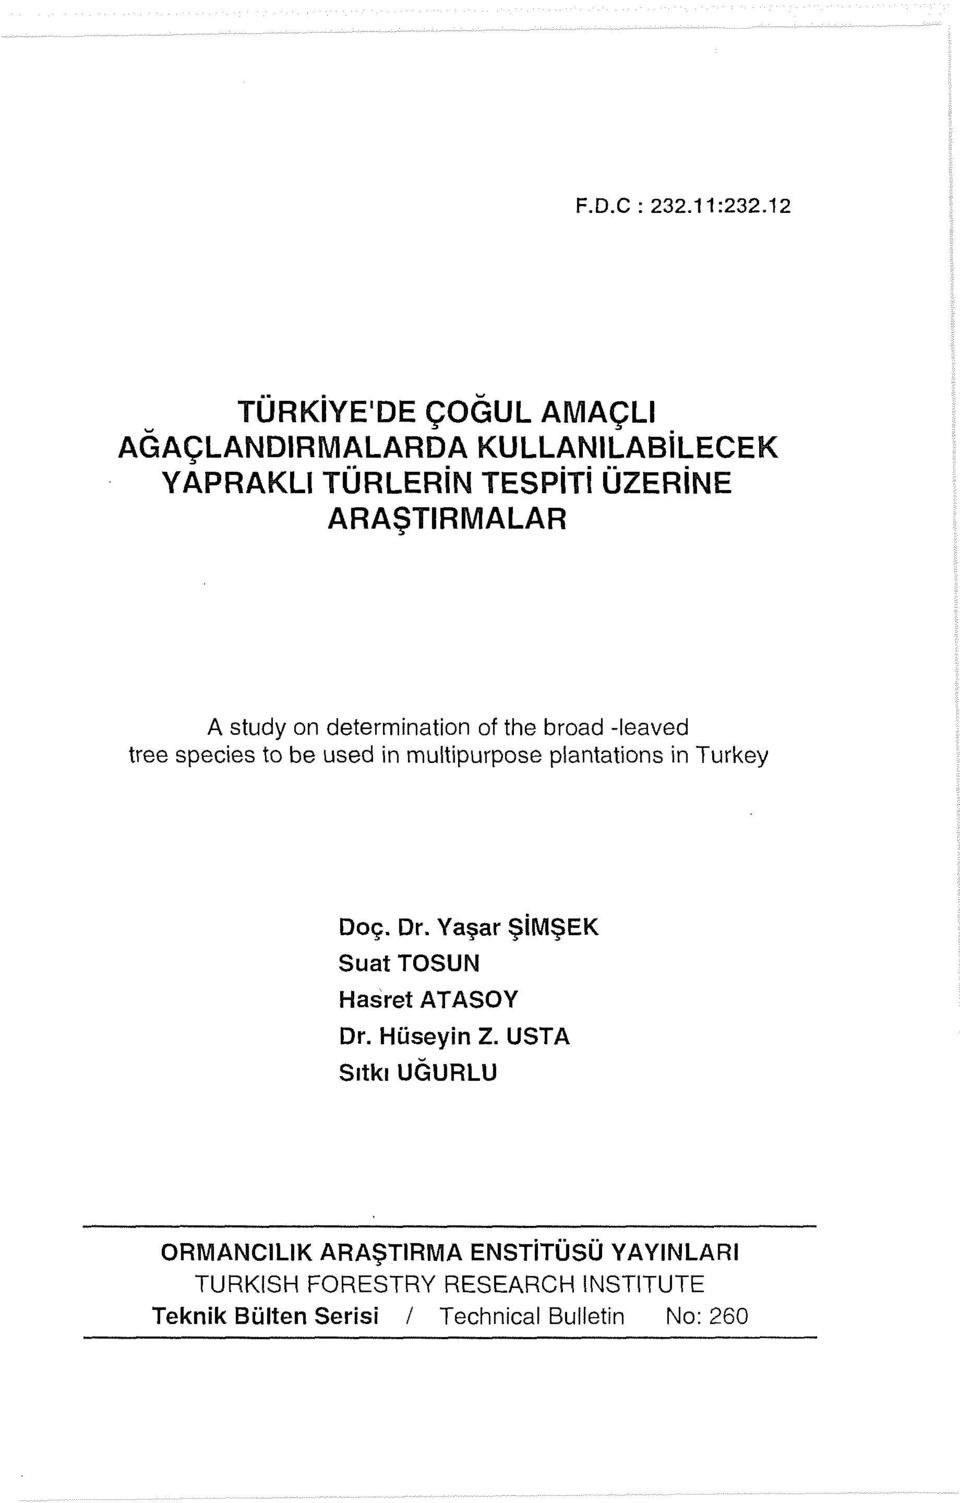 study on determination of the broad -leaved tree species to be used in multipurpose plantations in Turkey Doç.